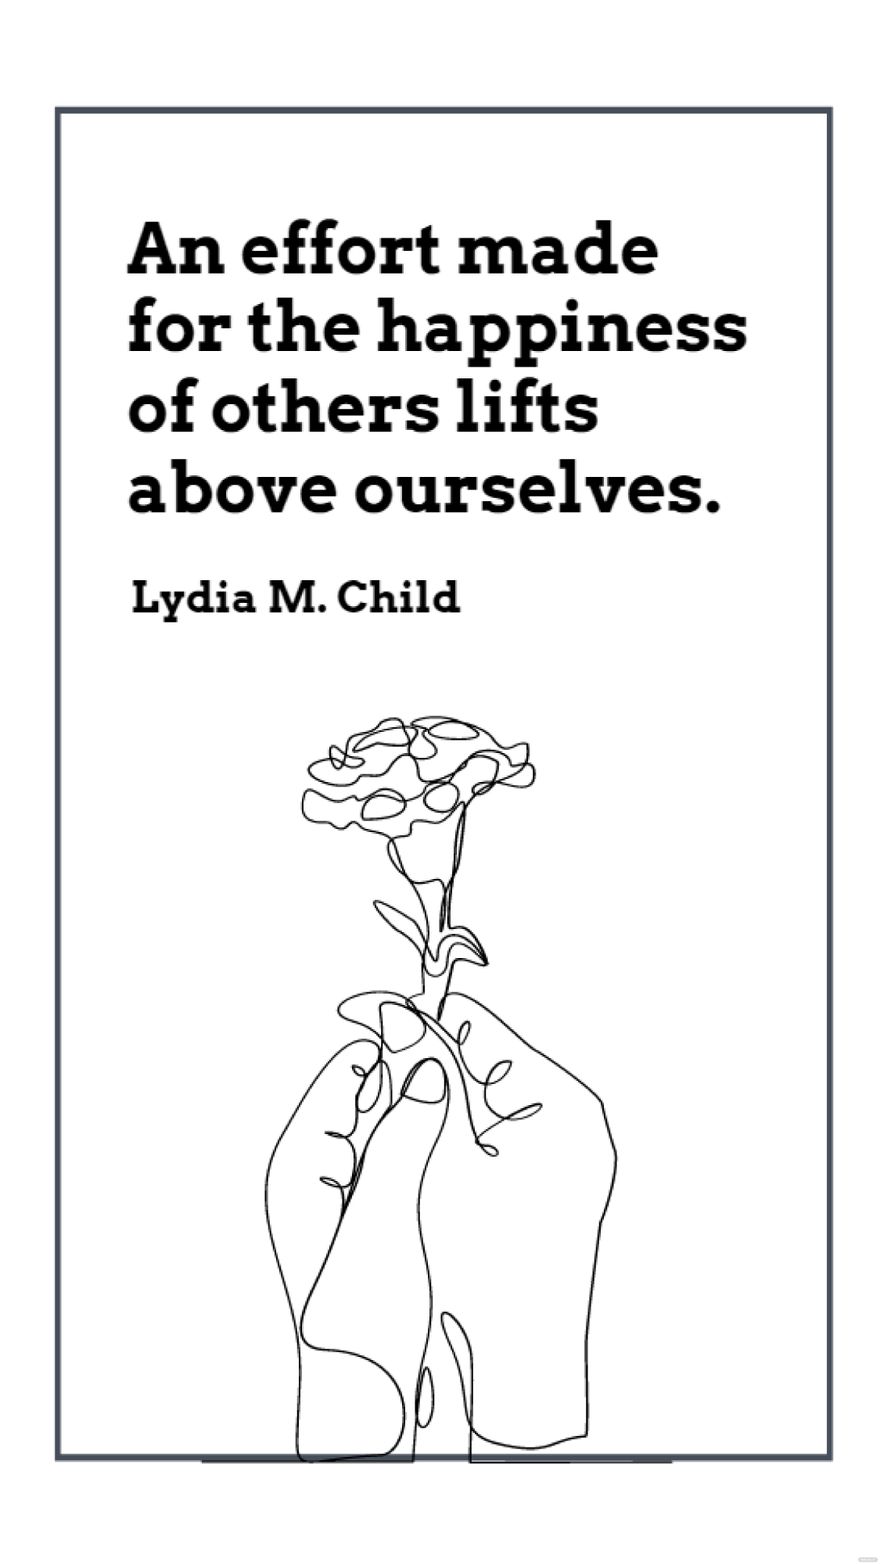 Free Lydia M. Child - An effort made for the happiness of others lifts above ourselves. in JPG